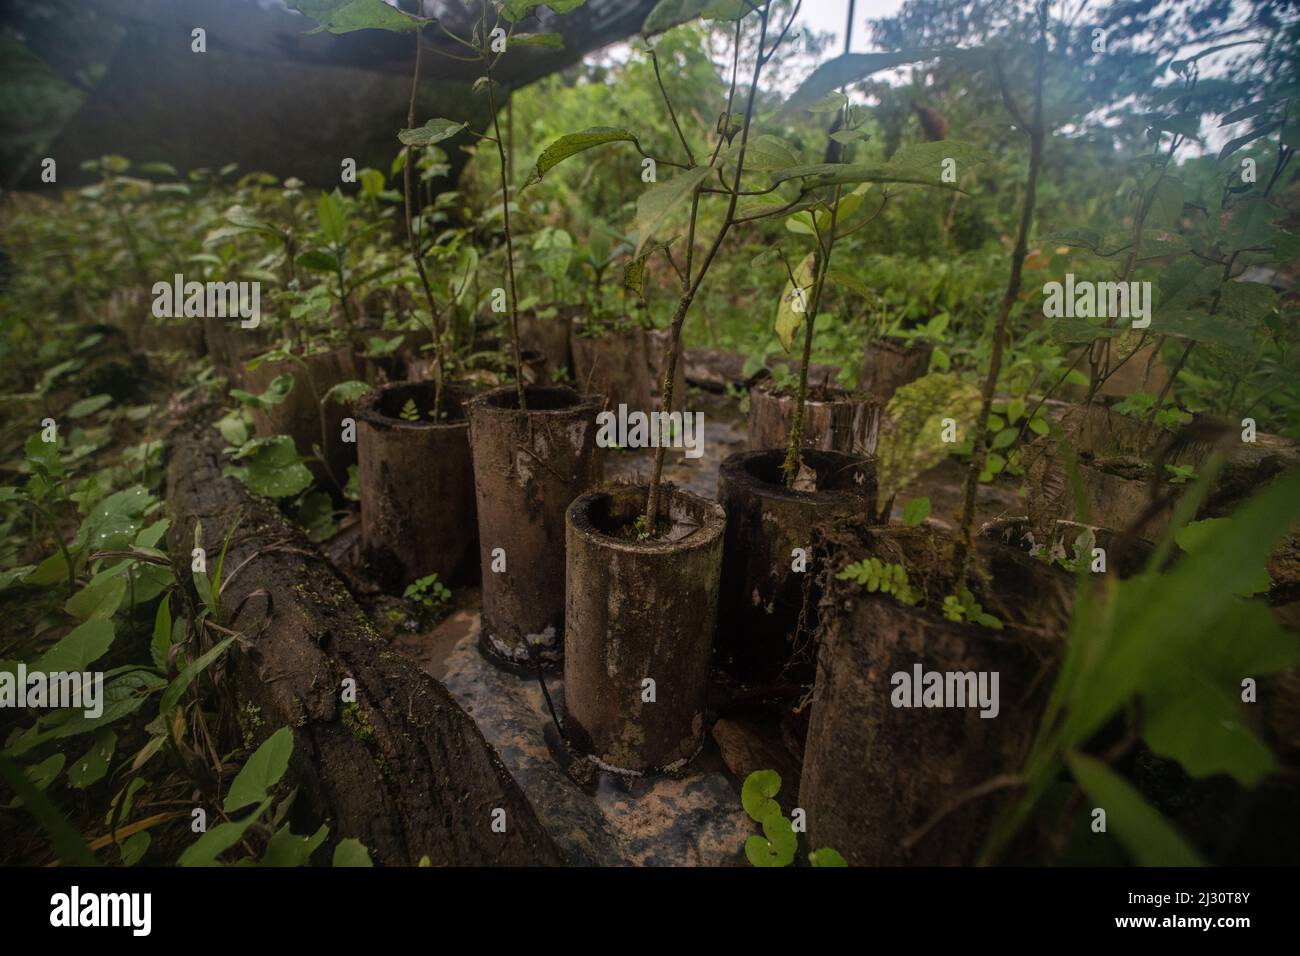 Small tree seedlings ready to be planted in the wild to combat deforestation and restore habitat in the El Oro province, Ecuador. Stock Photo